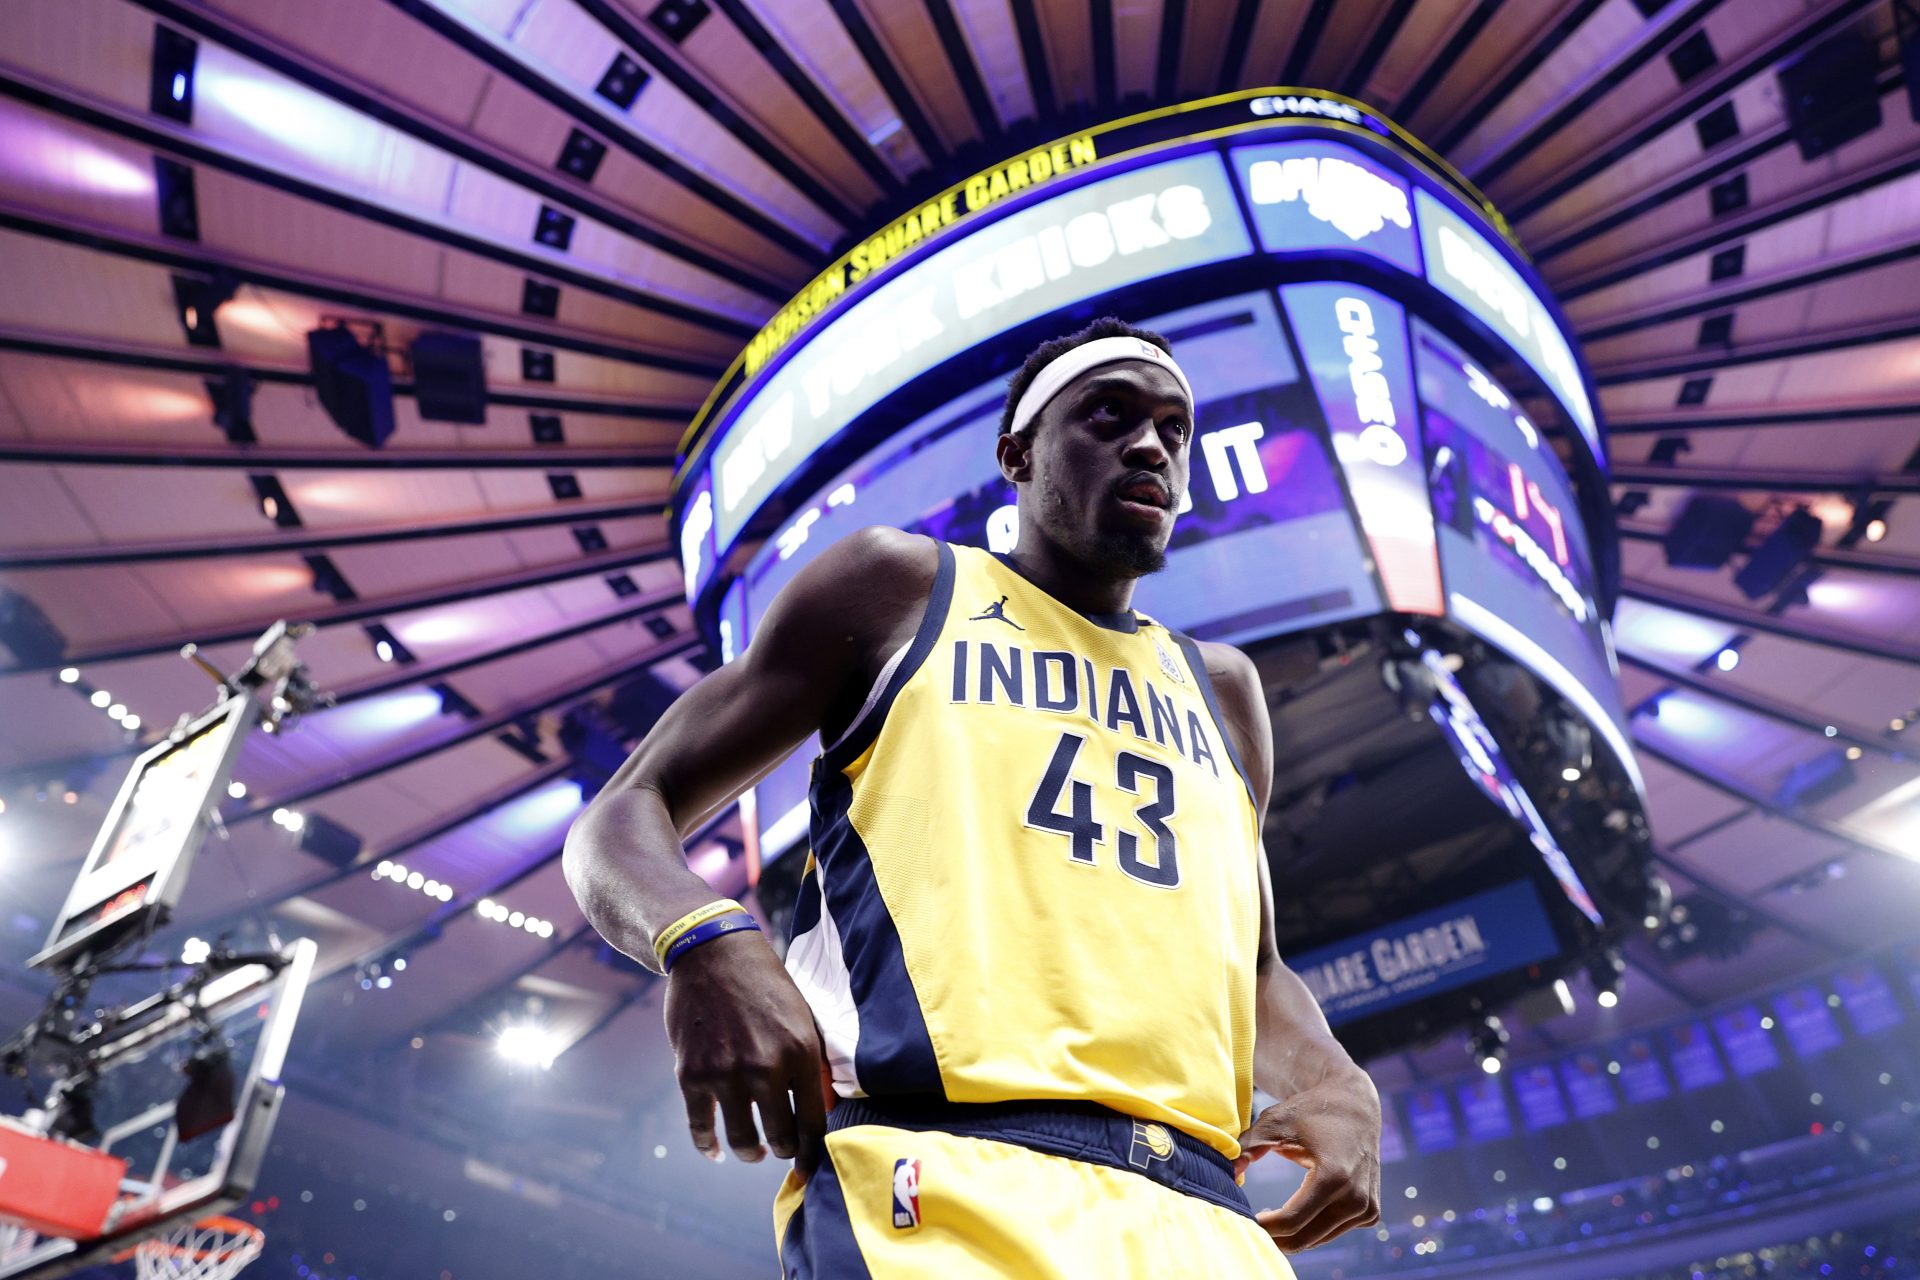 Pascal Siakam (Indiana Pacers) 